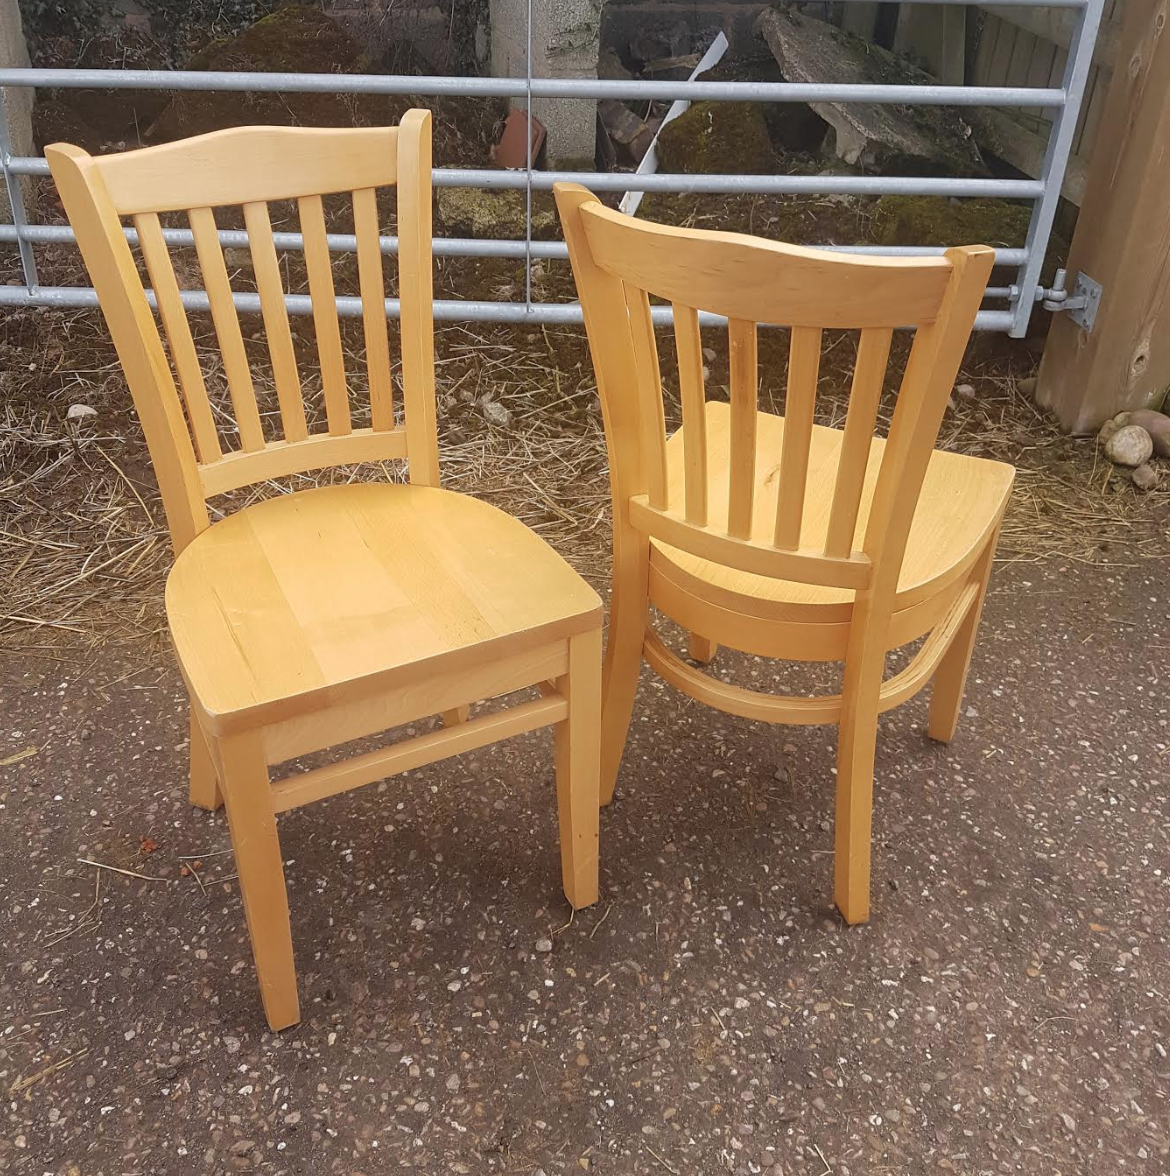 Secondhand Chairs And Tables Restaurant Chairs 40x Houston